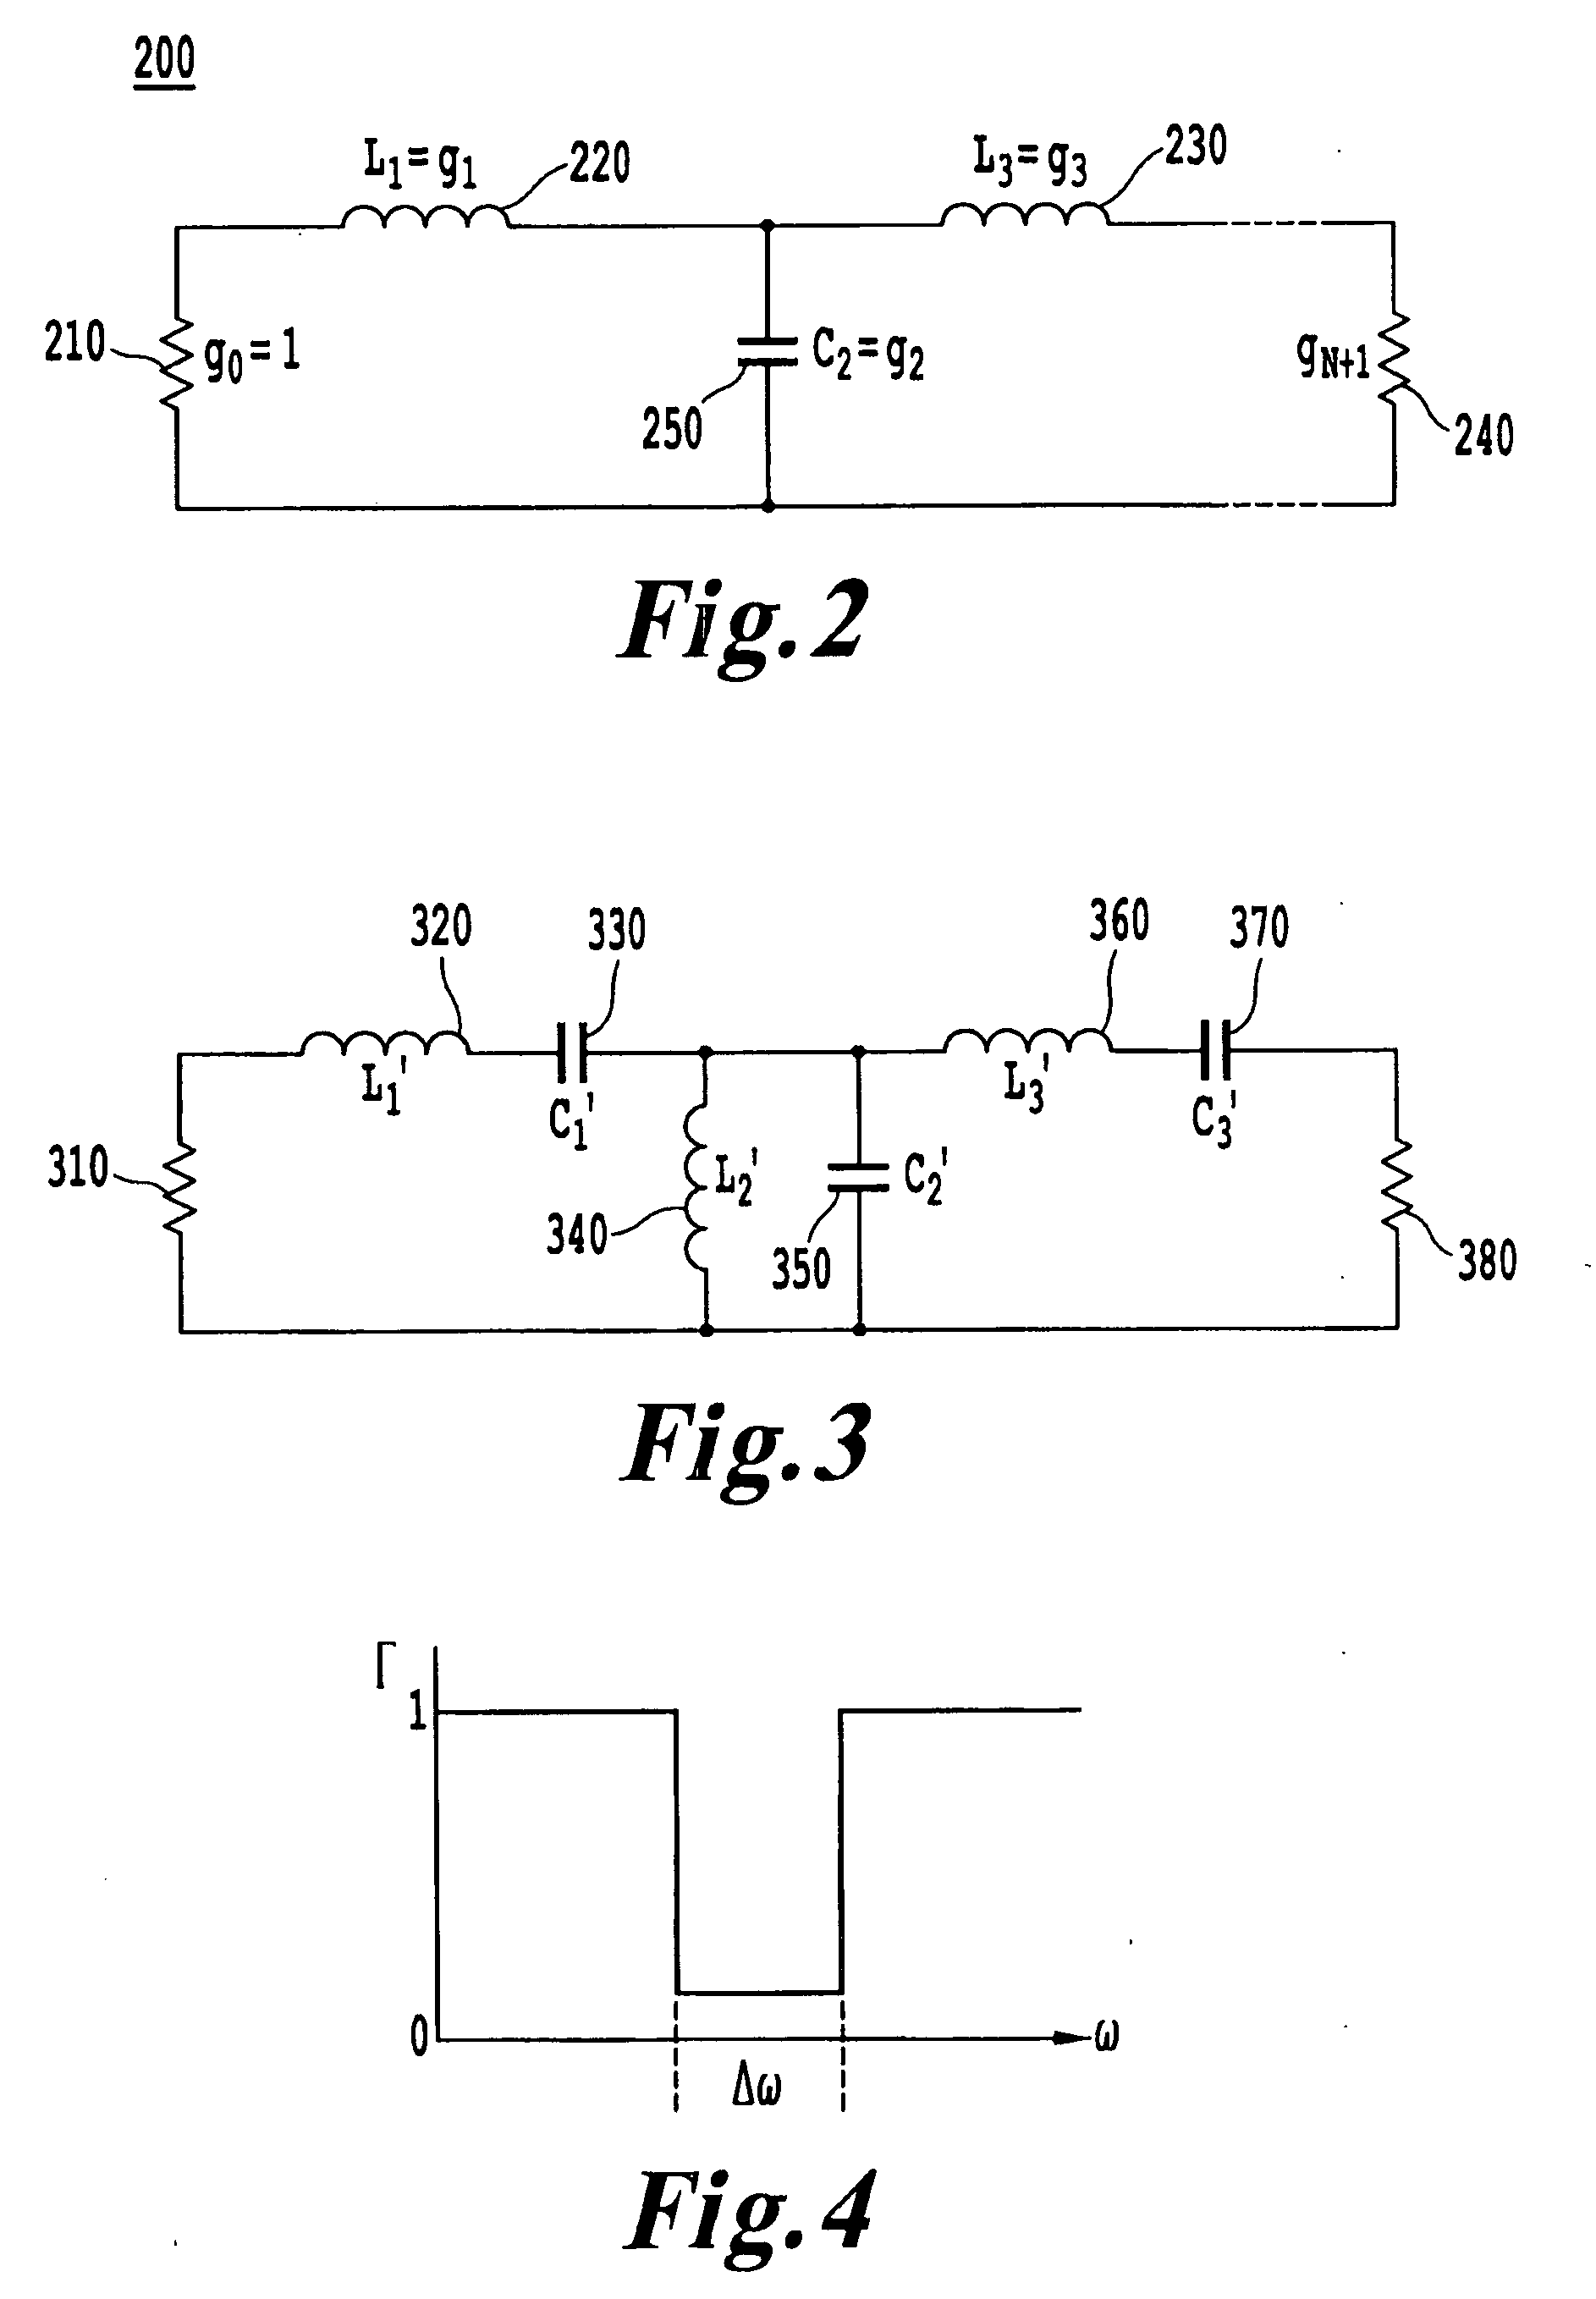 Apparatus and method of selecting components for a reconfigurable impedance match circuit